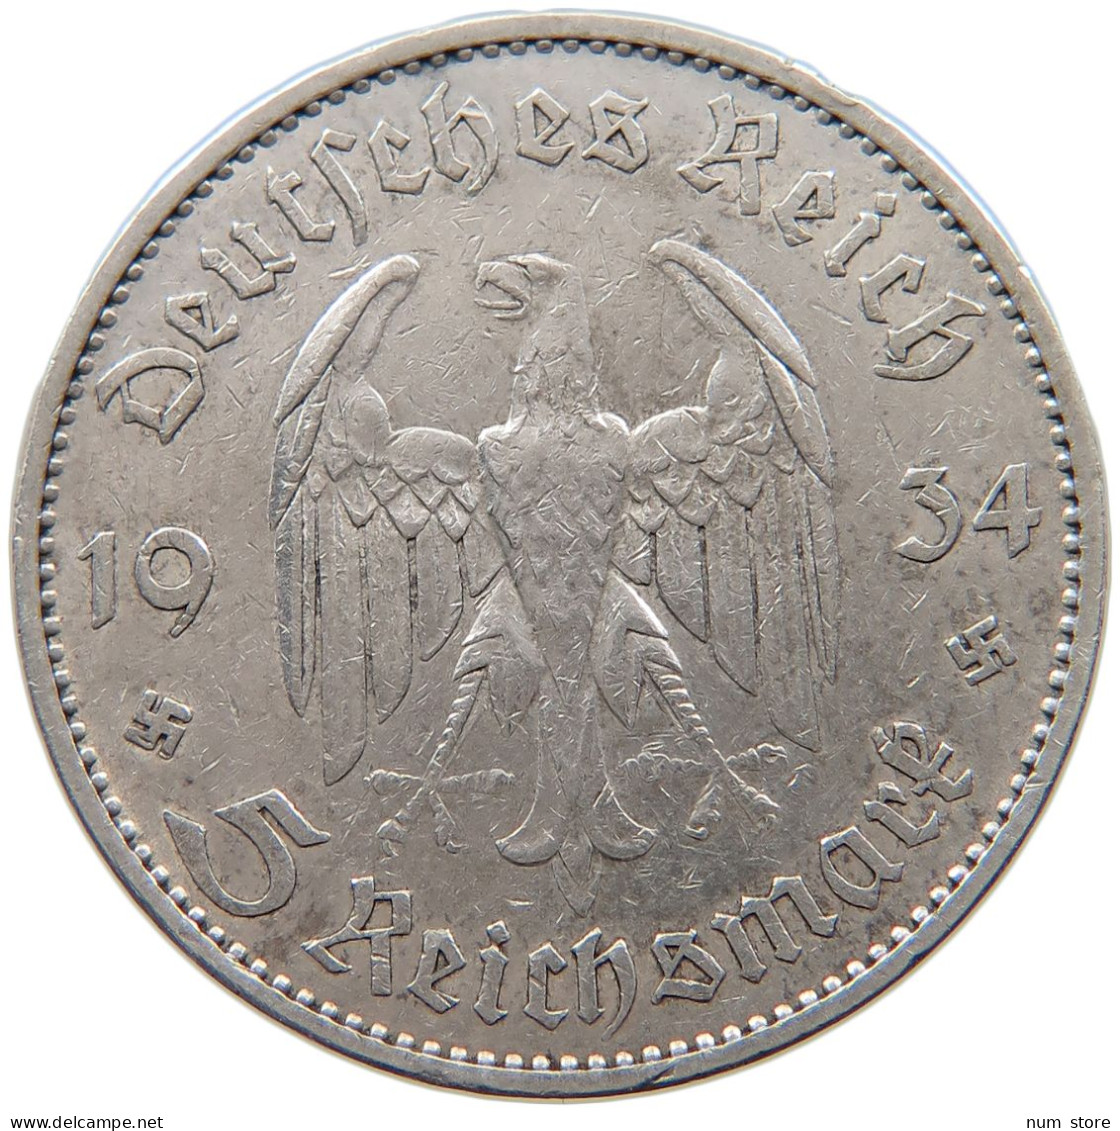 GERMANY 5 MARK 1934 A #s101 0459 - 5 Reichsmark